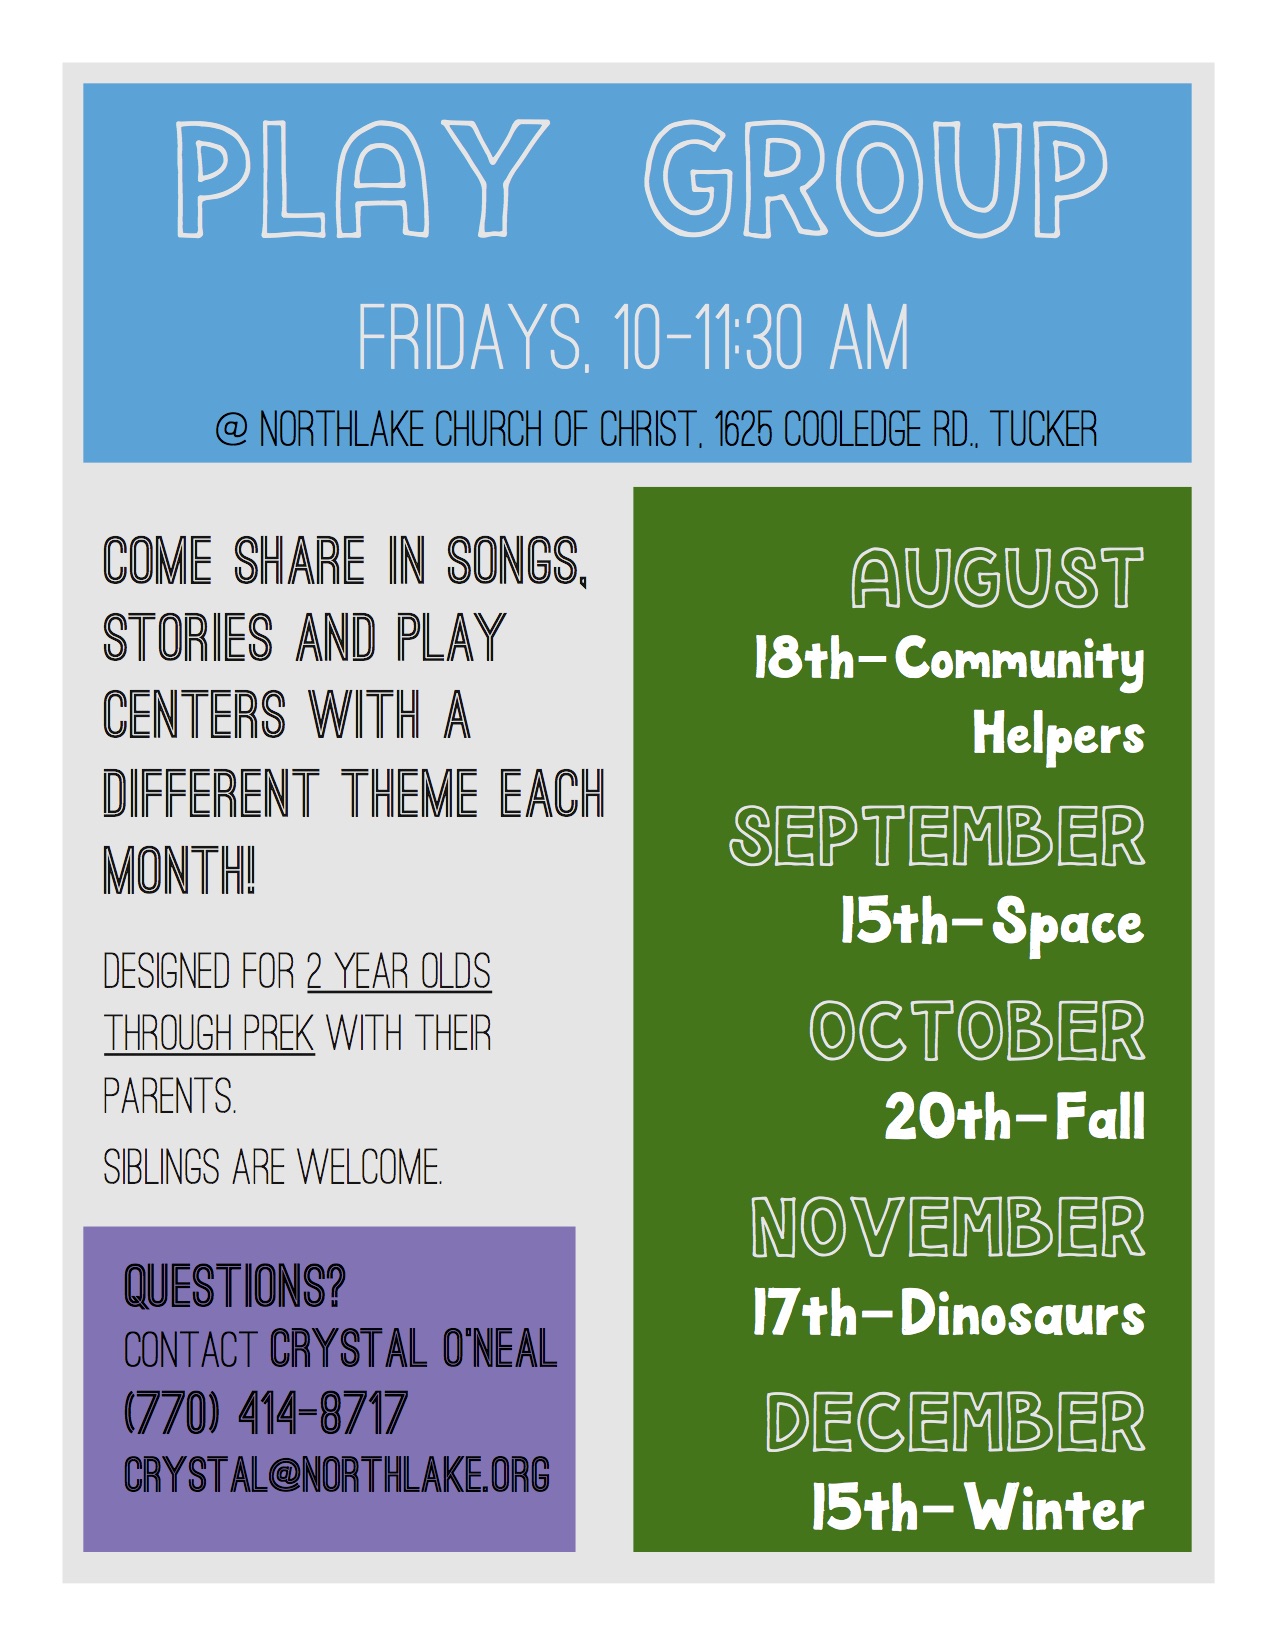 Play Day Flyer 2017 Aug.-Dec.